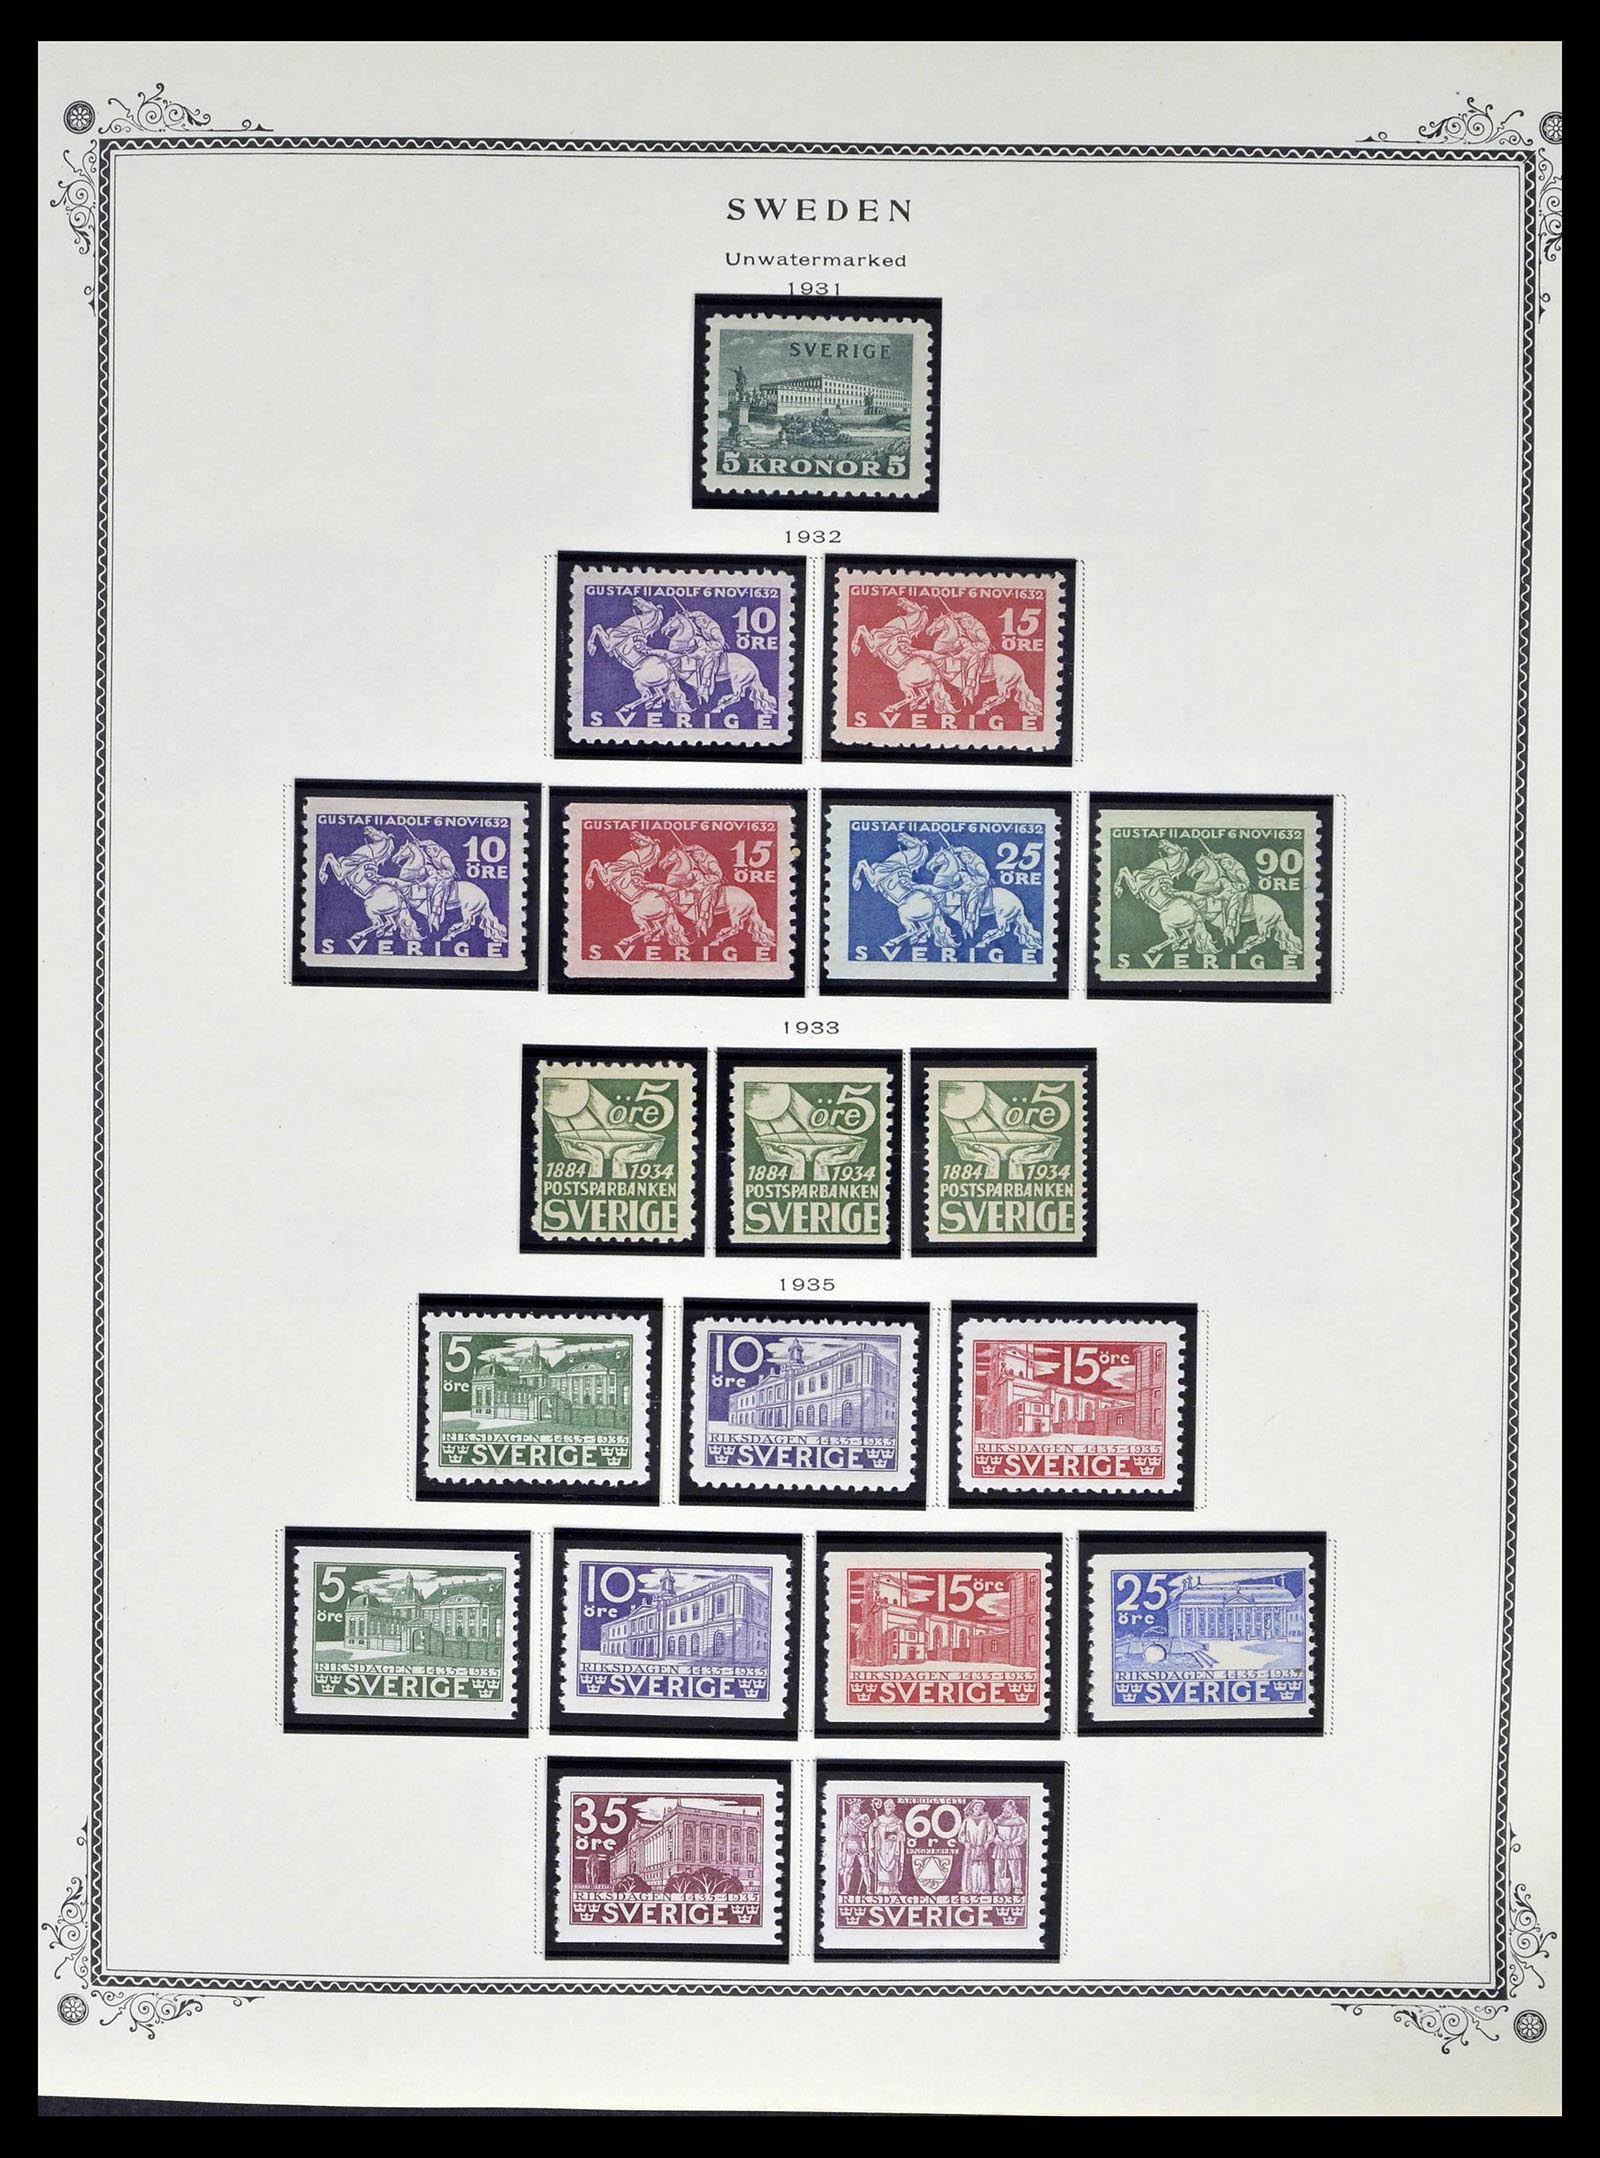 39179 0021 - Stamp collection 39179 Sweden 1855-1997.